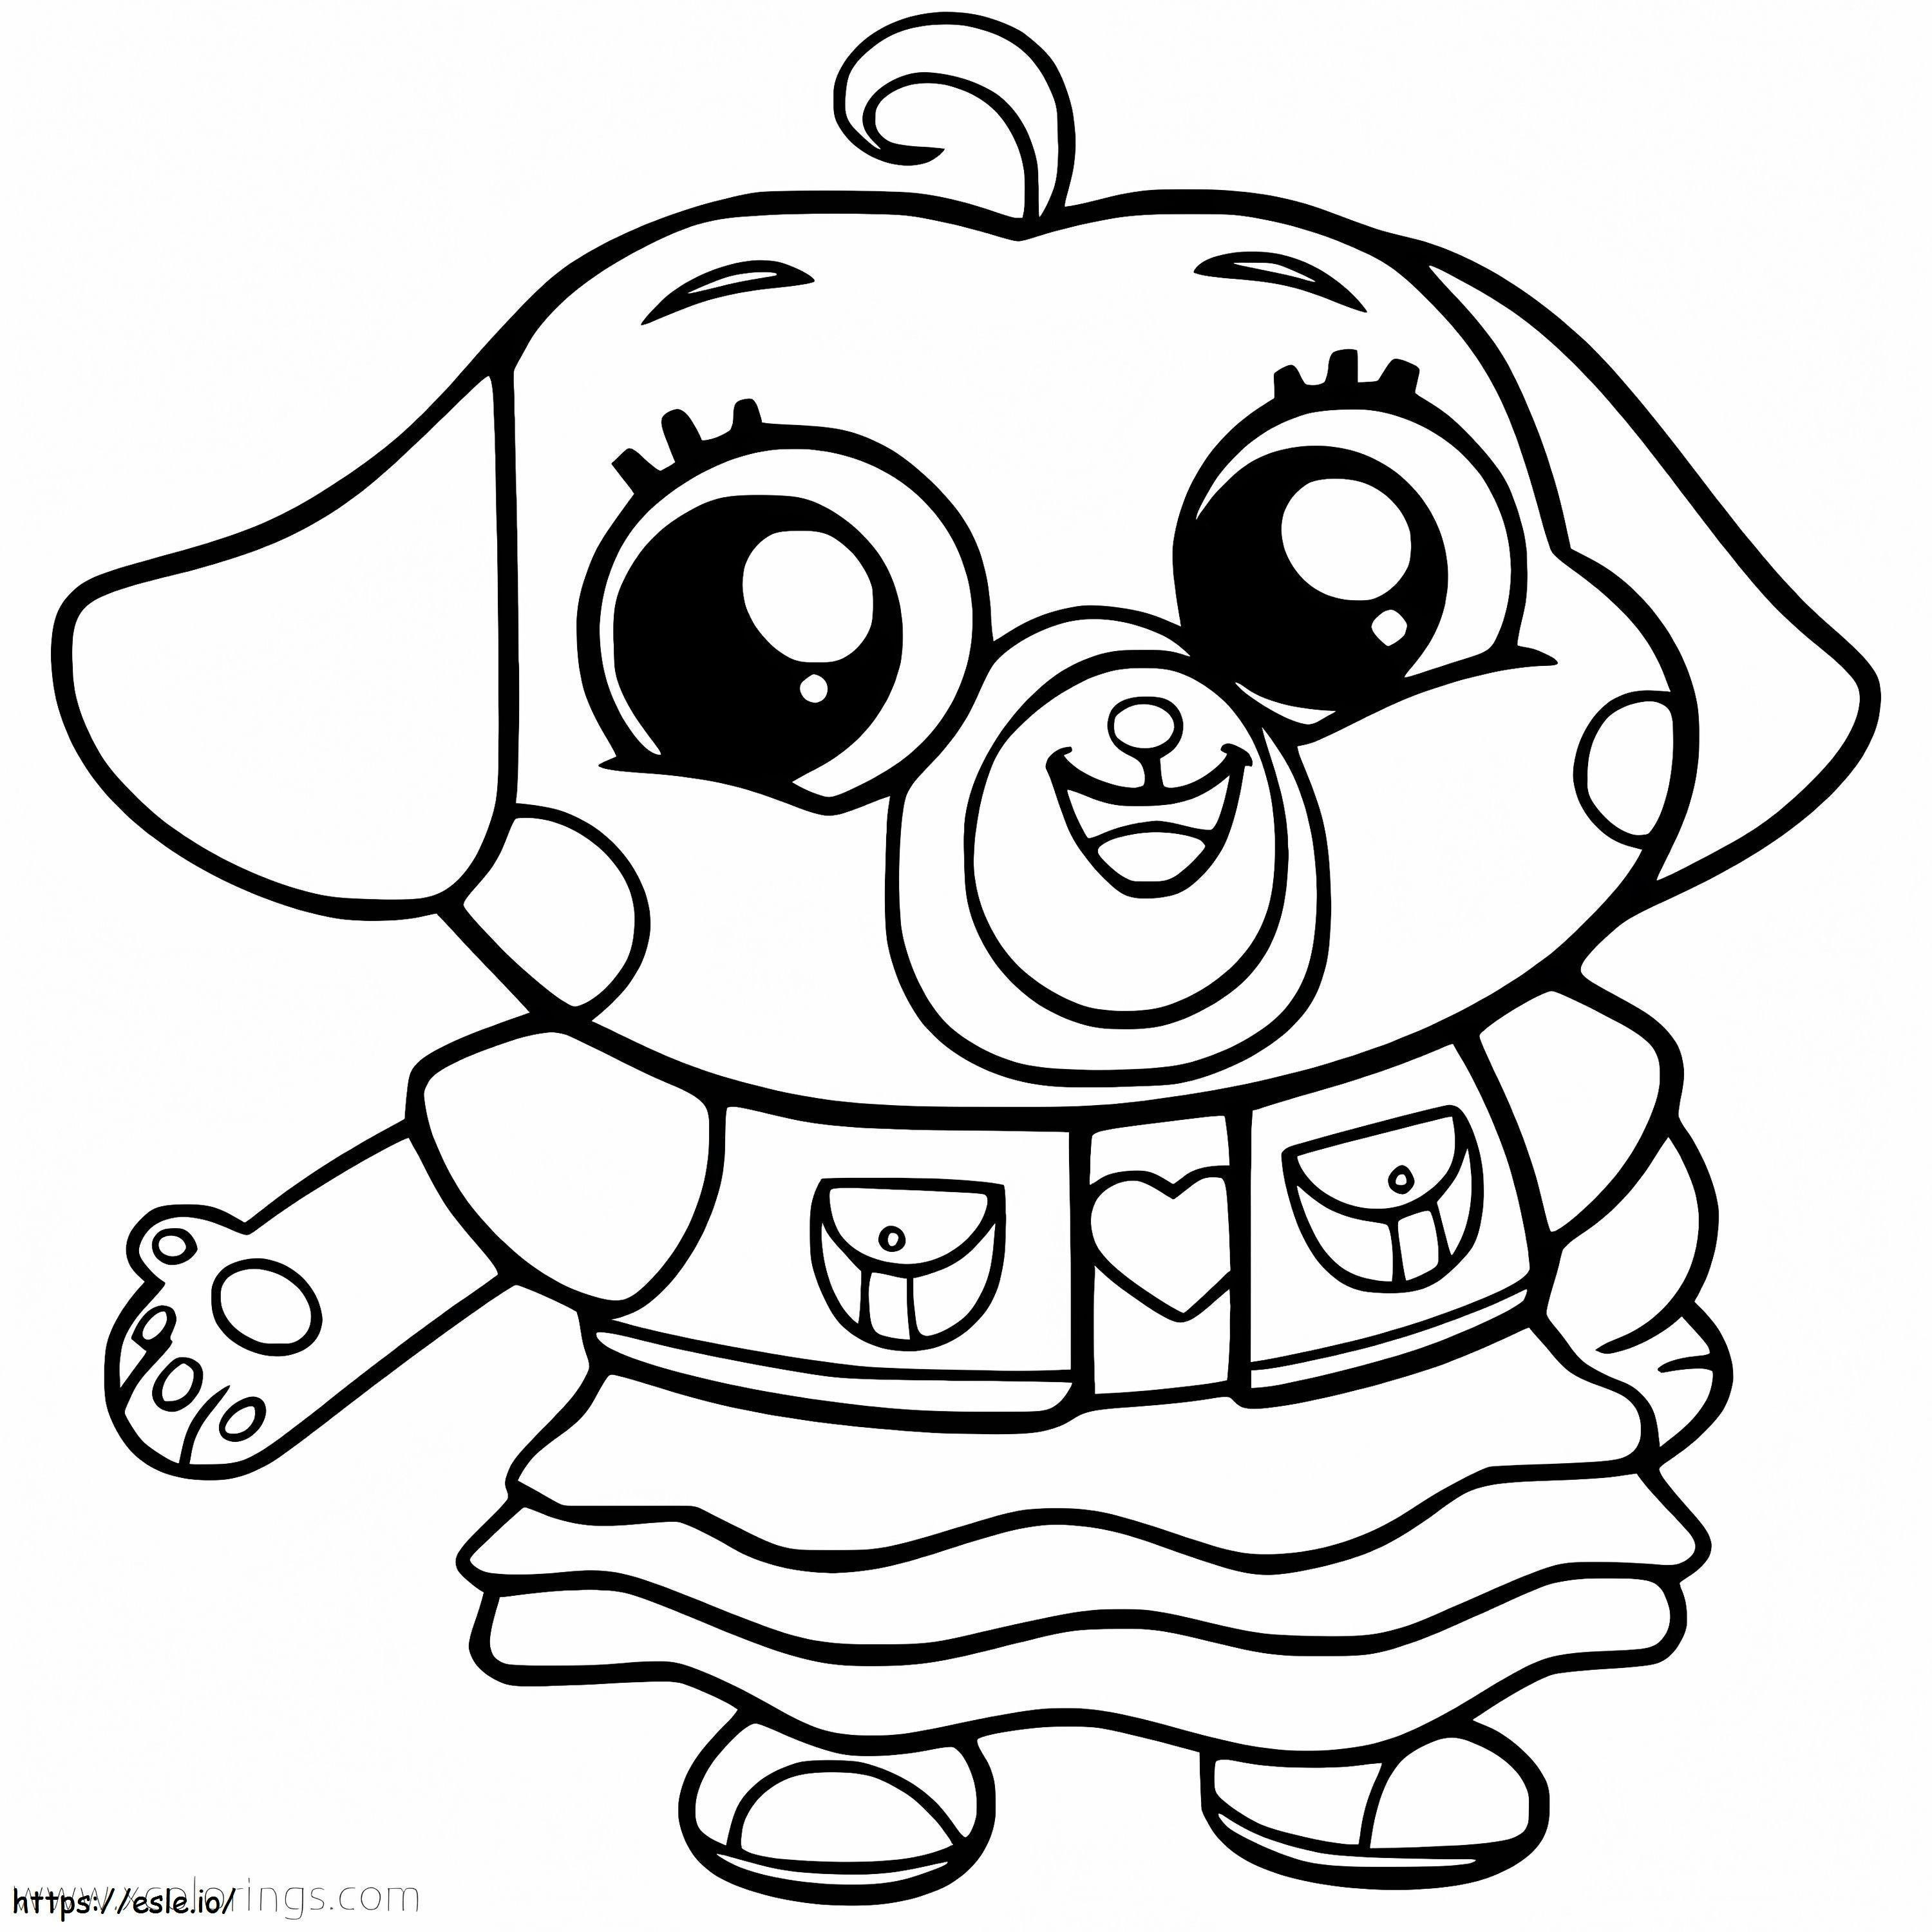 Happy Chip 1 coloring page